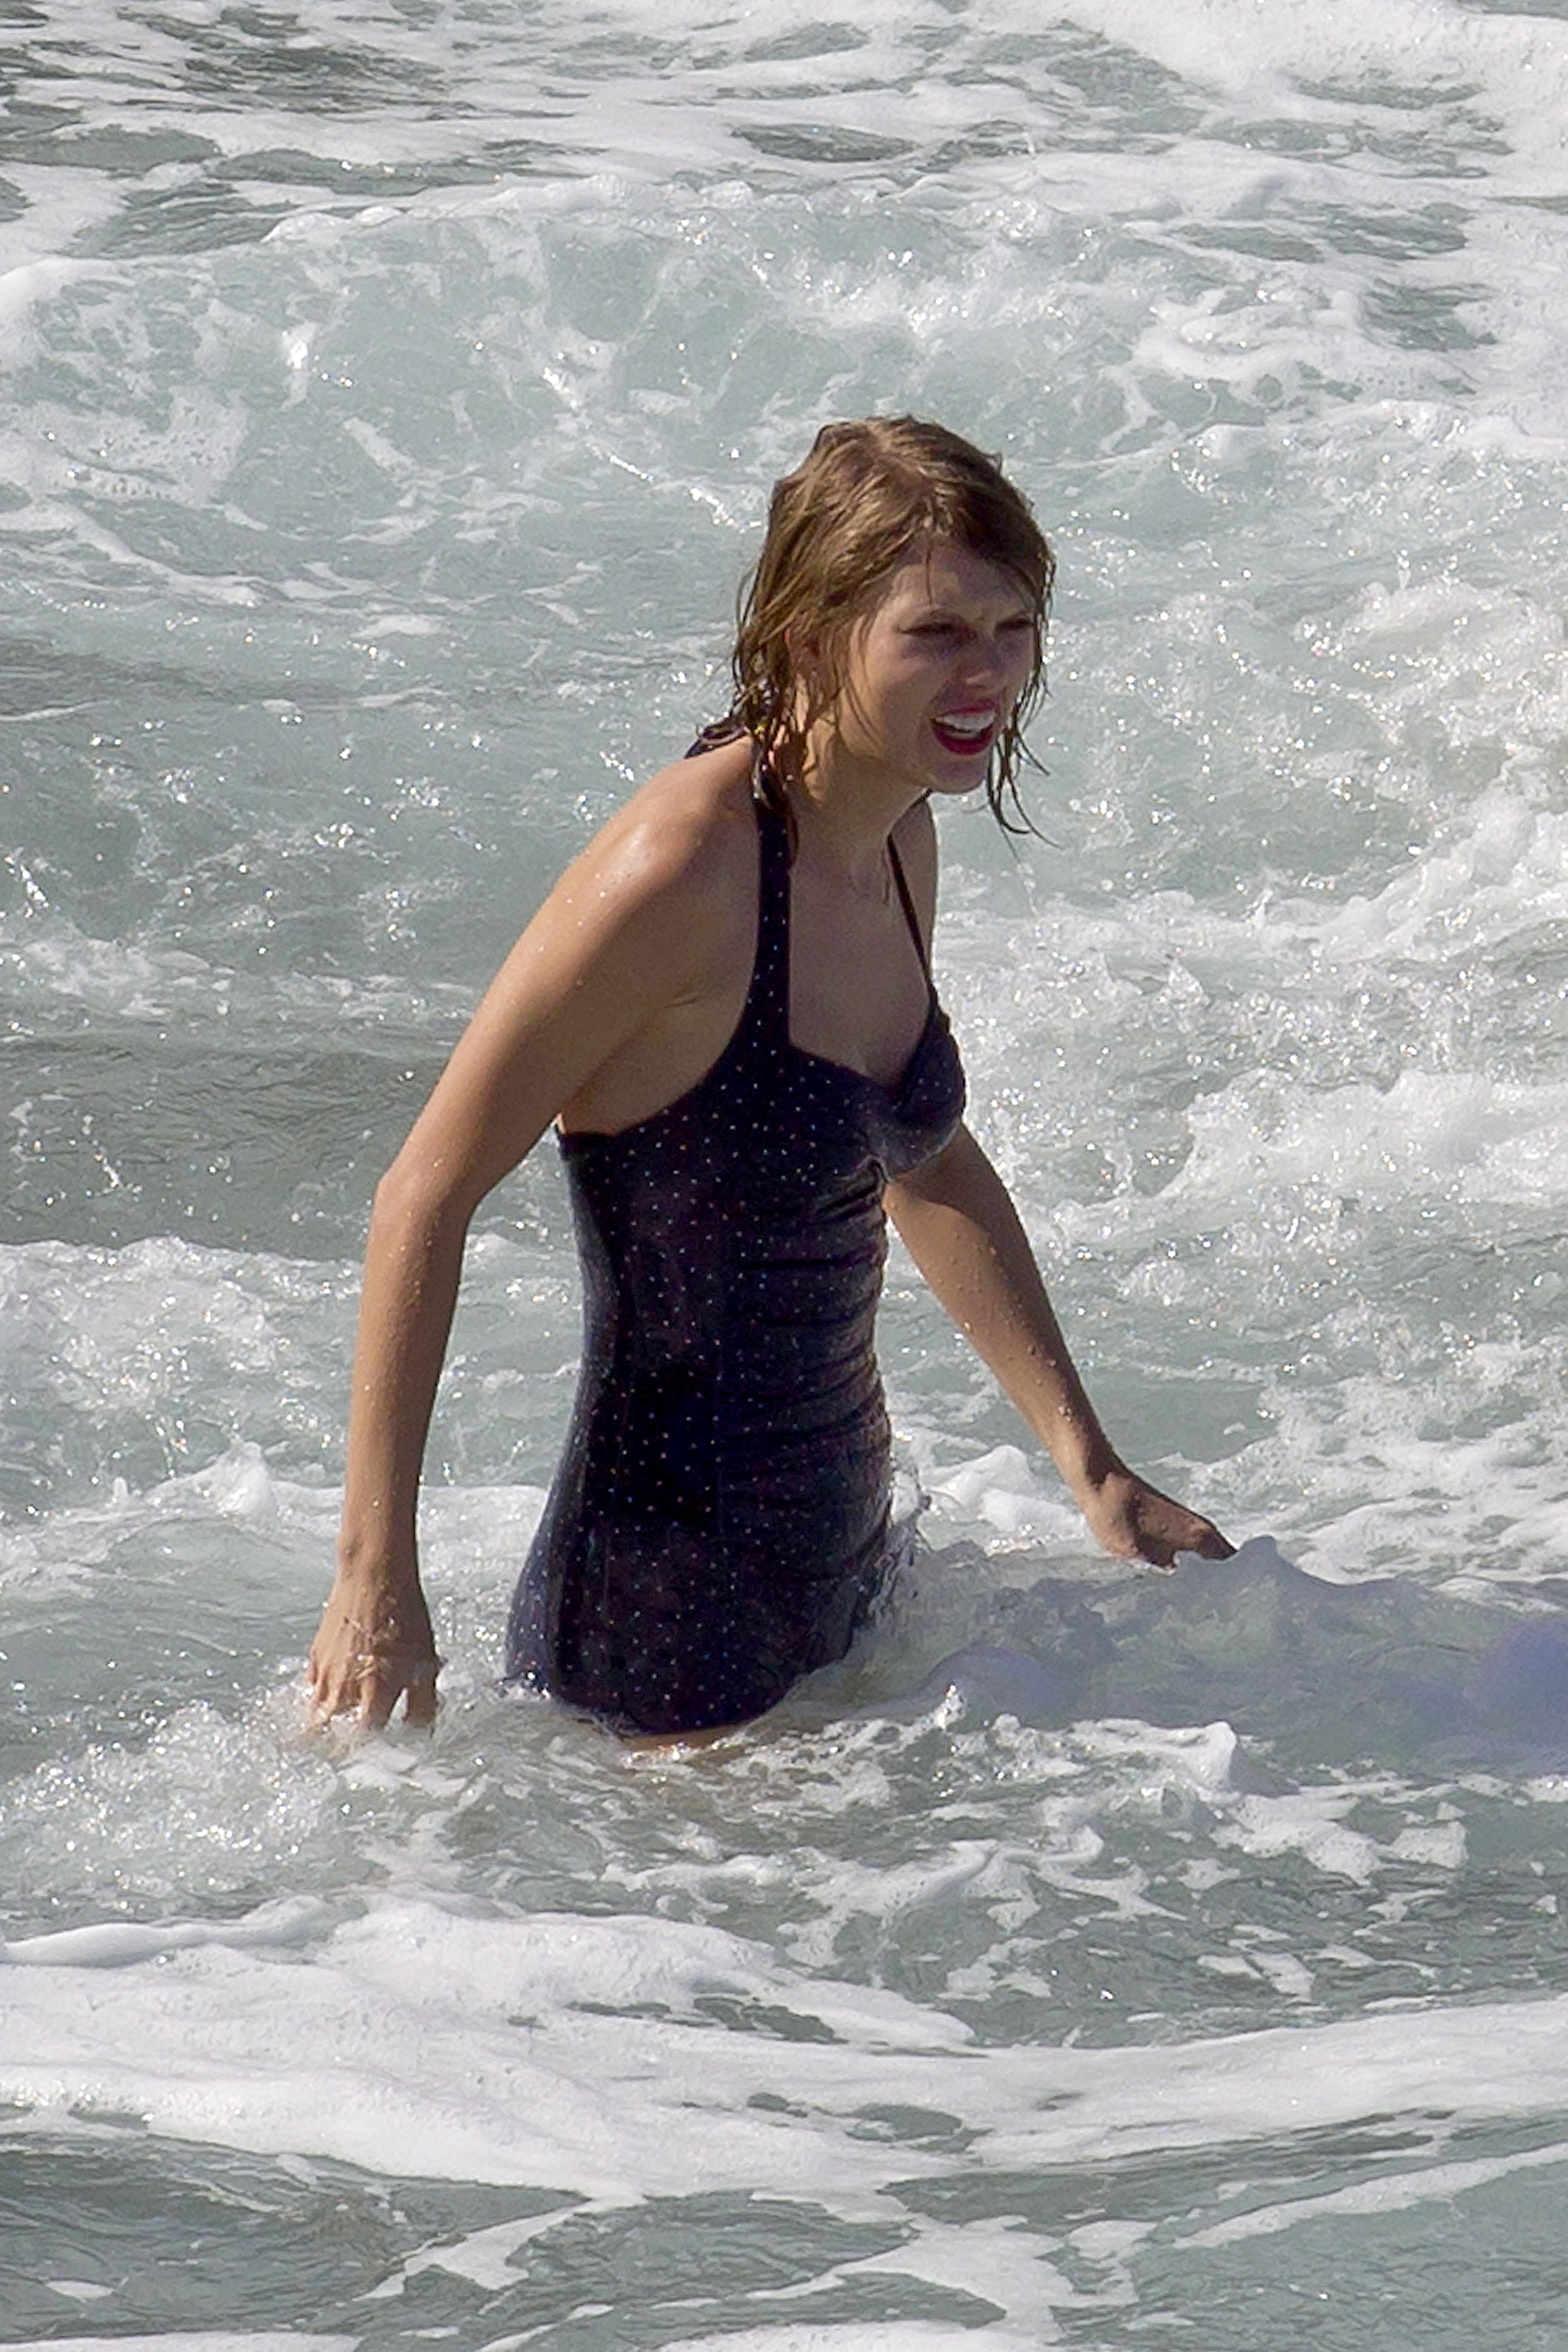 https://celebrityslips.com/wp-content/uploads/2015/01/taylor-swift-bathing-suit-and-her-friends-at-the-beach-15.jpg